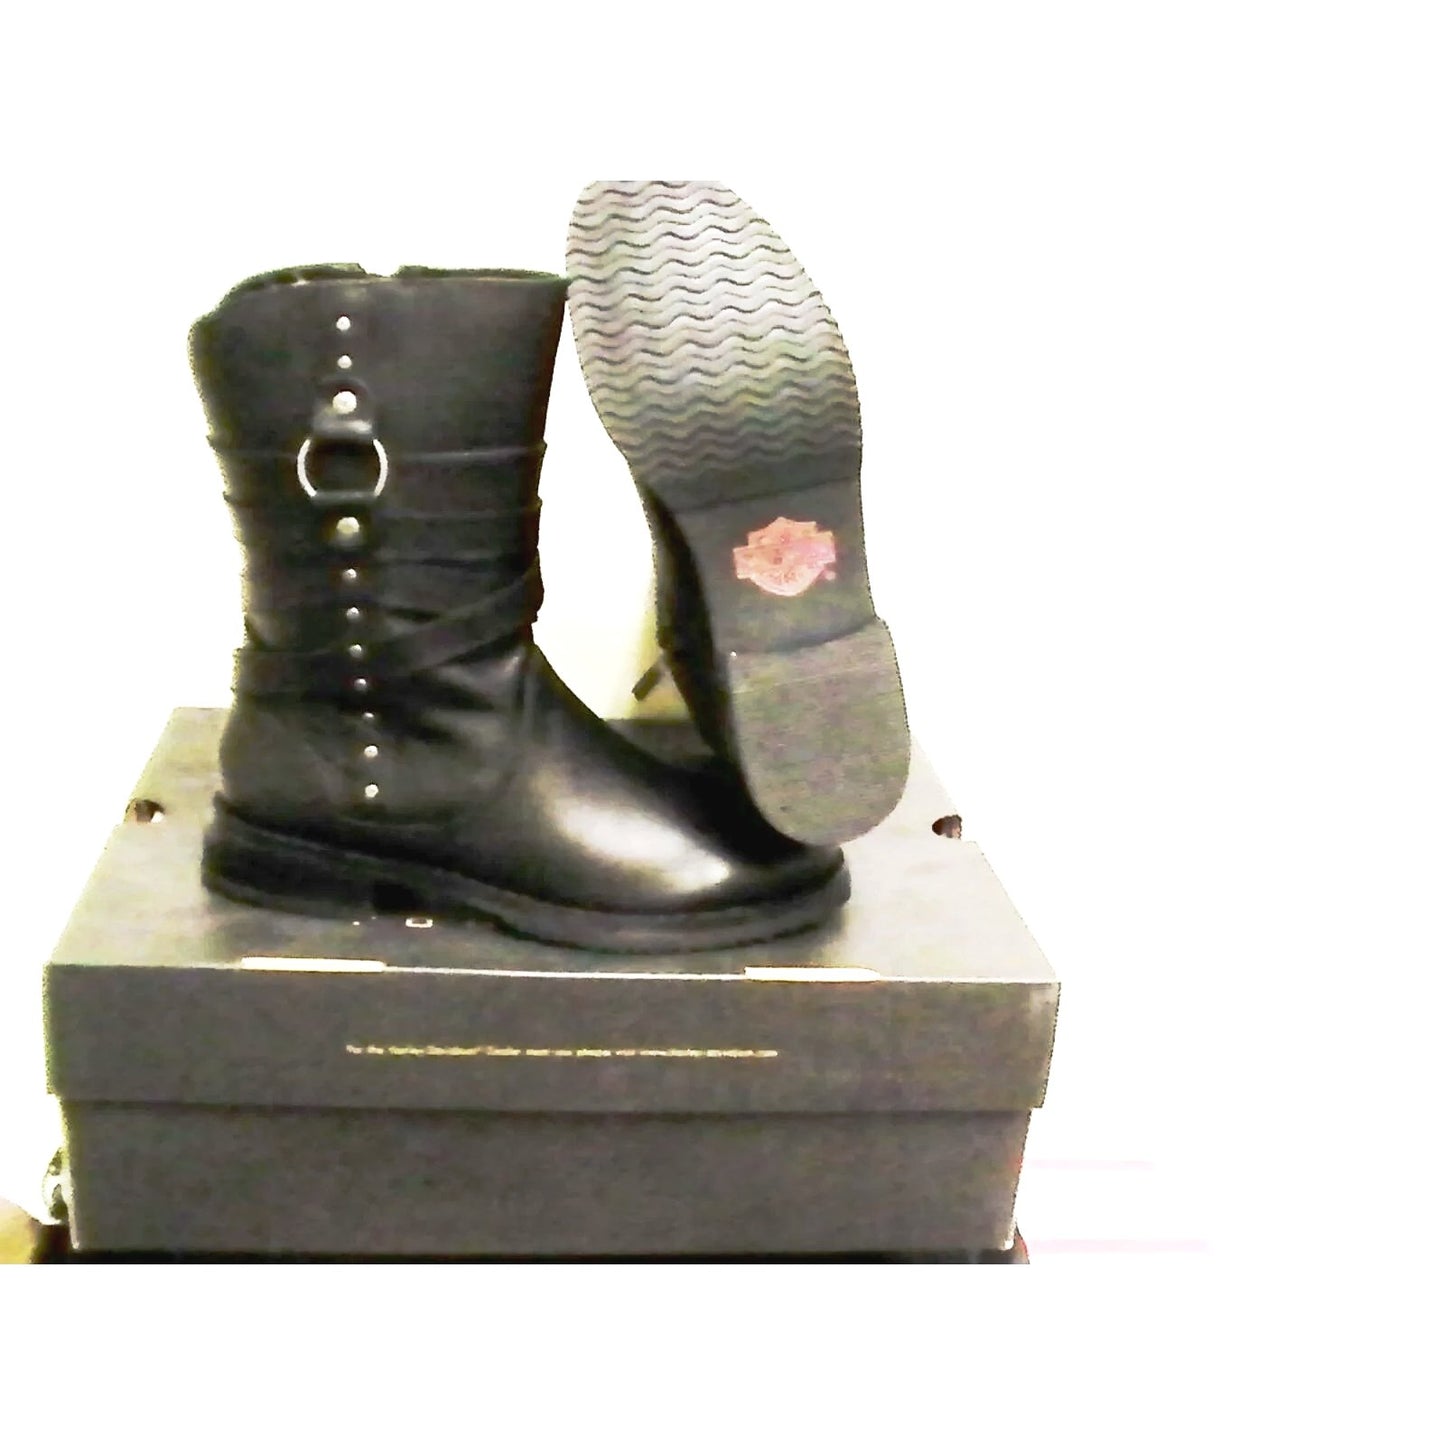 Women's harley davidson riding boots nora size 6 new with box